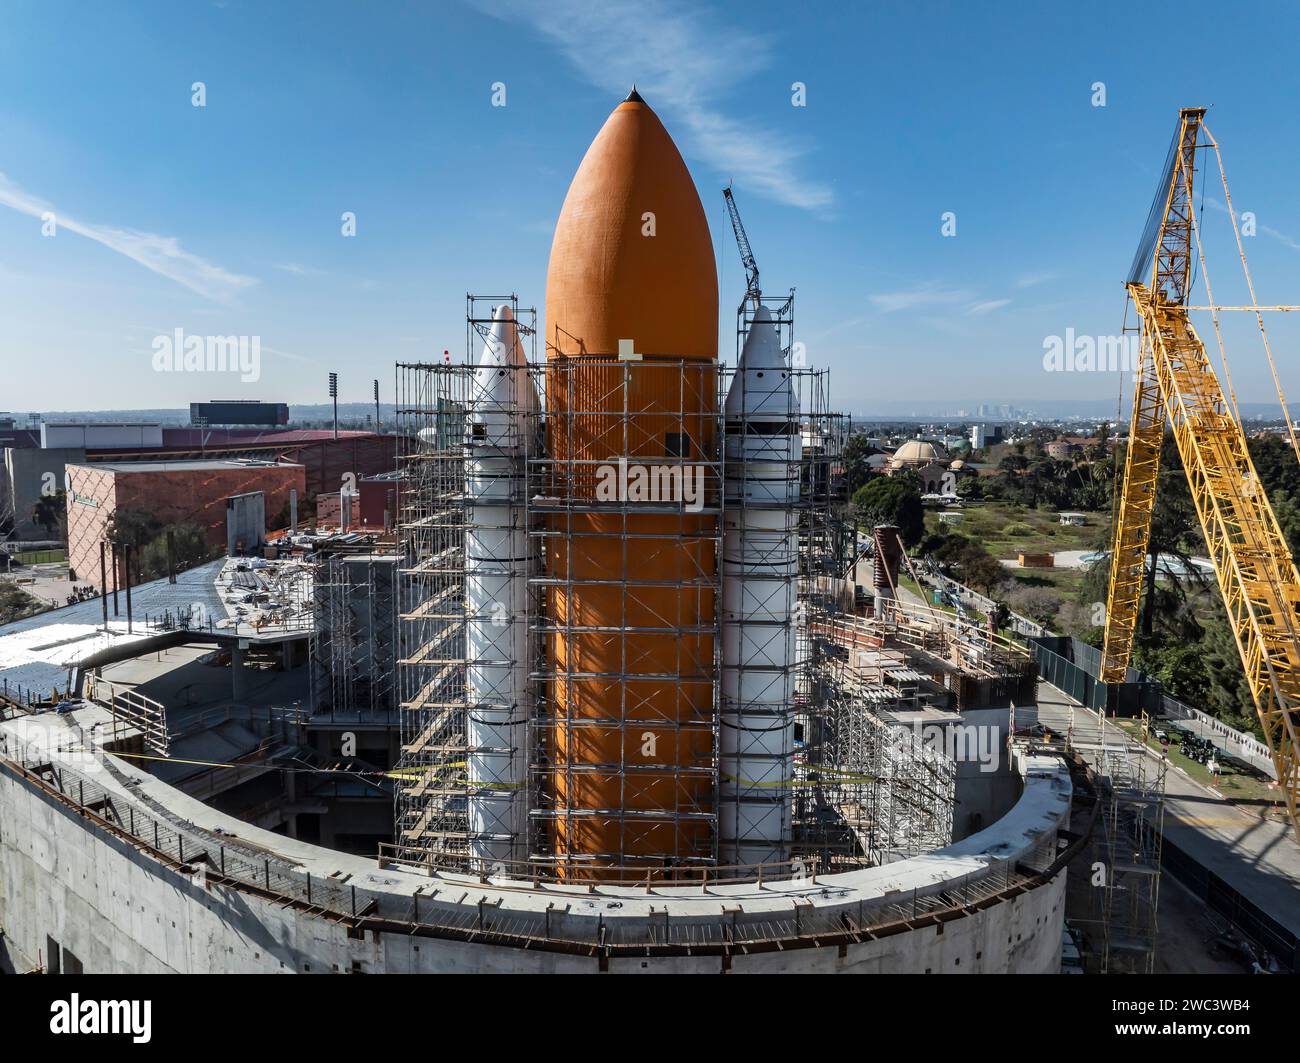 Los Angeles, USA. 13th Jan, 2024. A giant orange fuel tank and two twin solid rocket boosters for the Space Shuttle display at the California Science Center are now in place. The Shuttle Endeavour will be placed upon the orange tank later this month, and the building will be eventually enclosed. 1/13/2024 Los Angeles, CA., USA (Photo by Ted Soqui/Sipa USA) Credit: Sipa USA/Alamy Live News Stock Photo